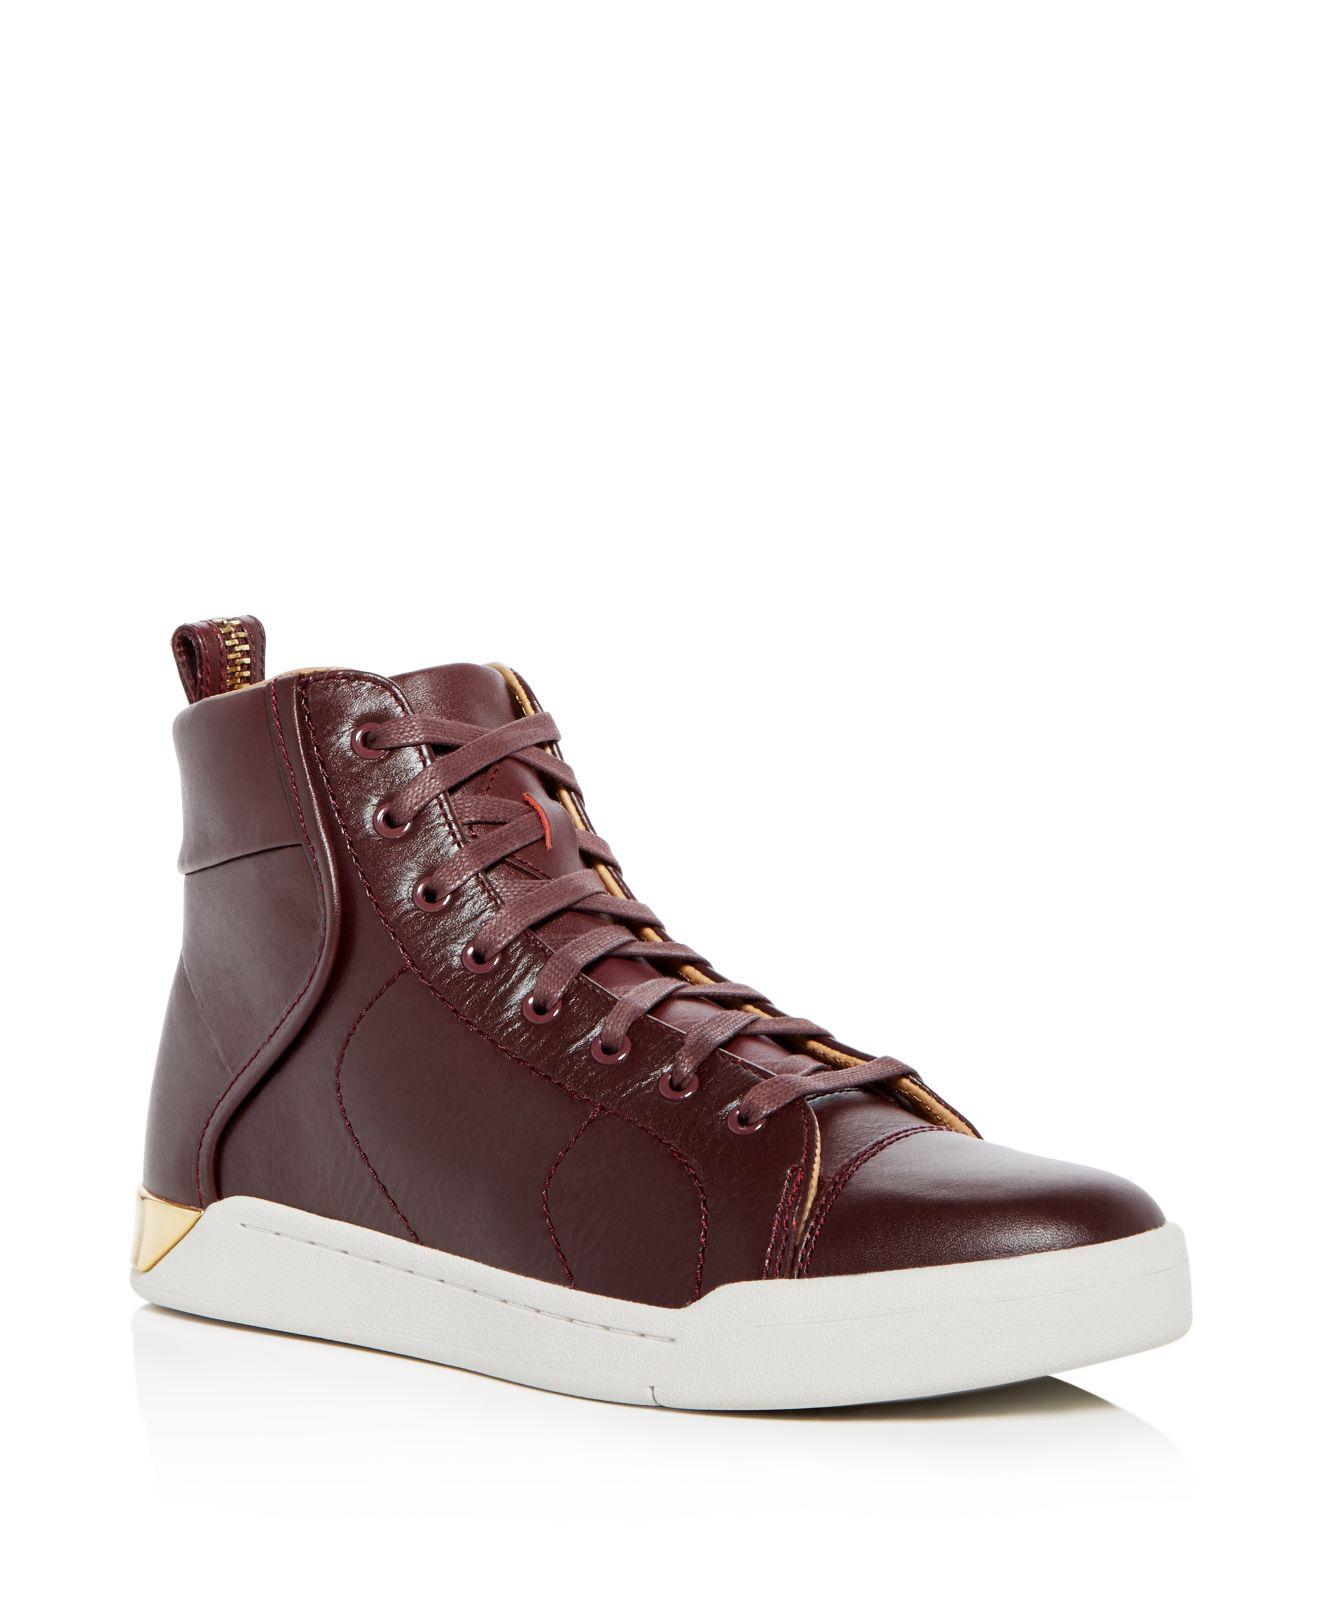 DIESEL Men's Tempus S-marquise Leather High Top Sneakers in Brown for ...